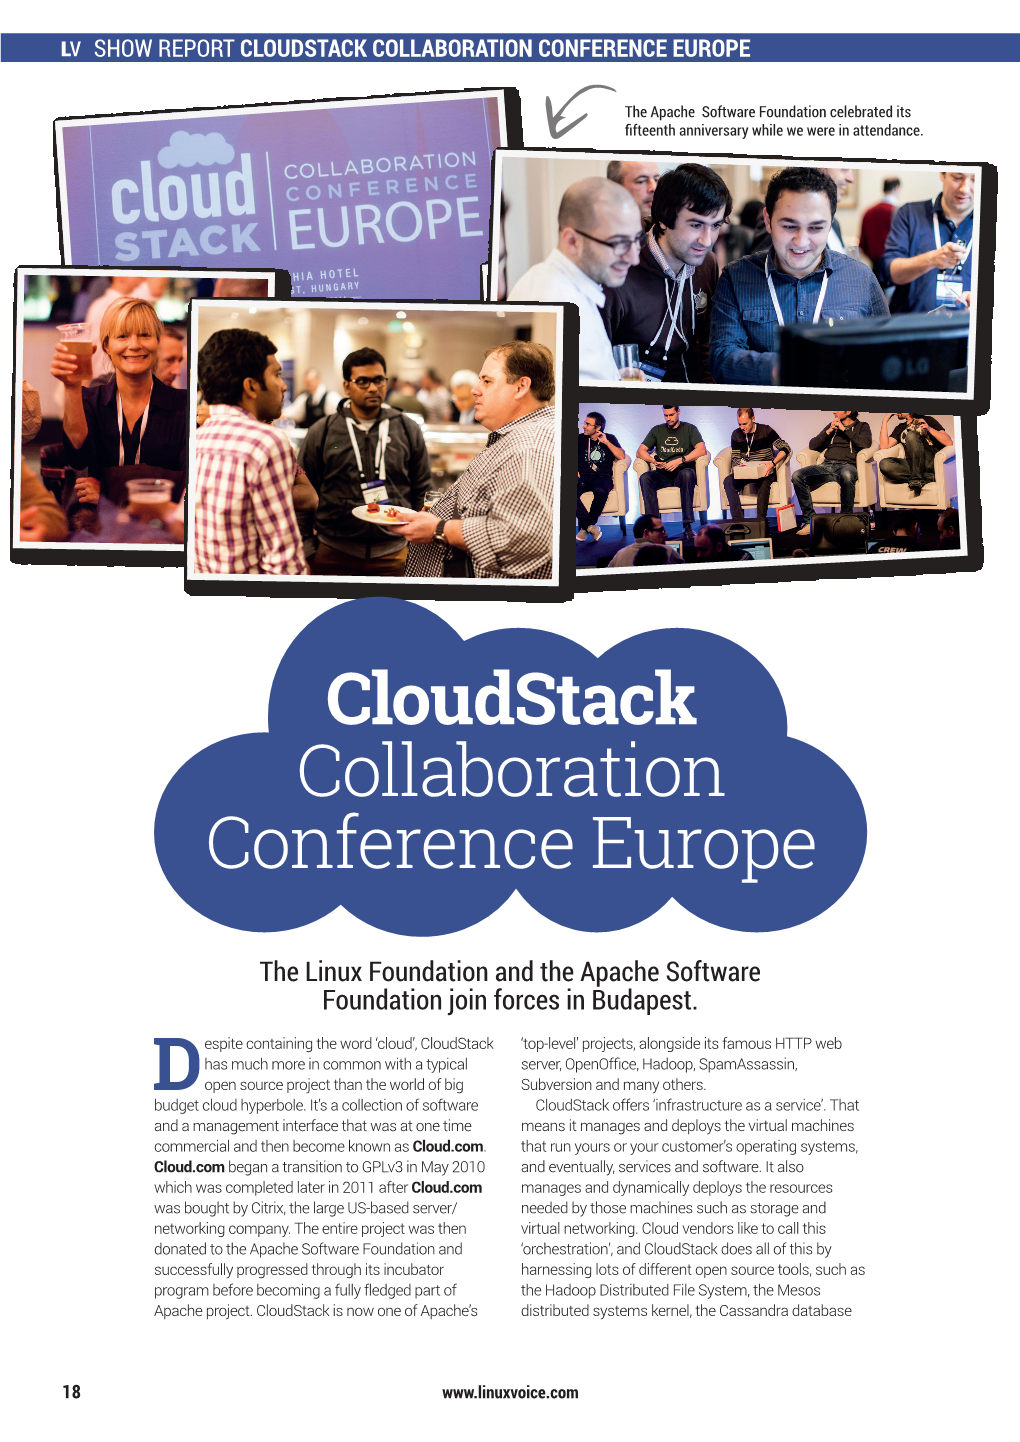 Cloudstack Collaboration Conference Europe